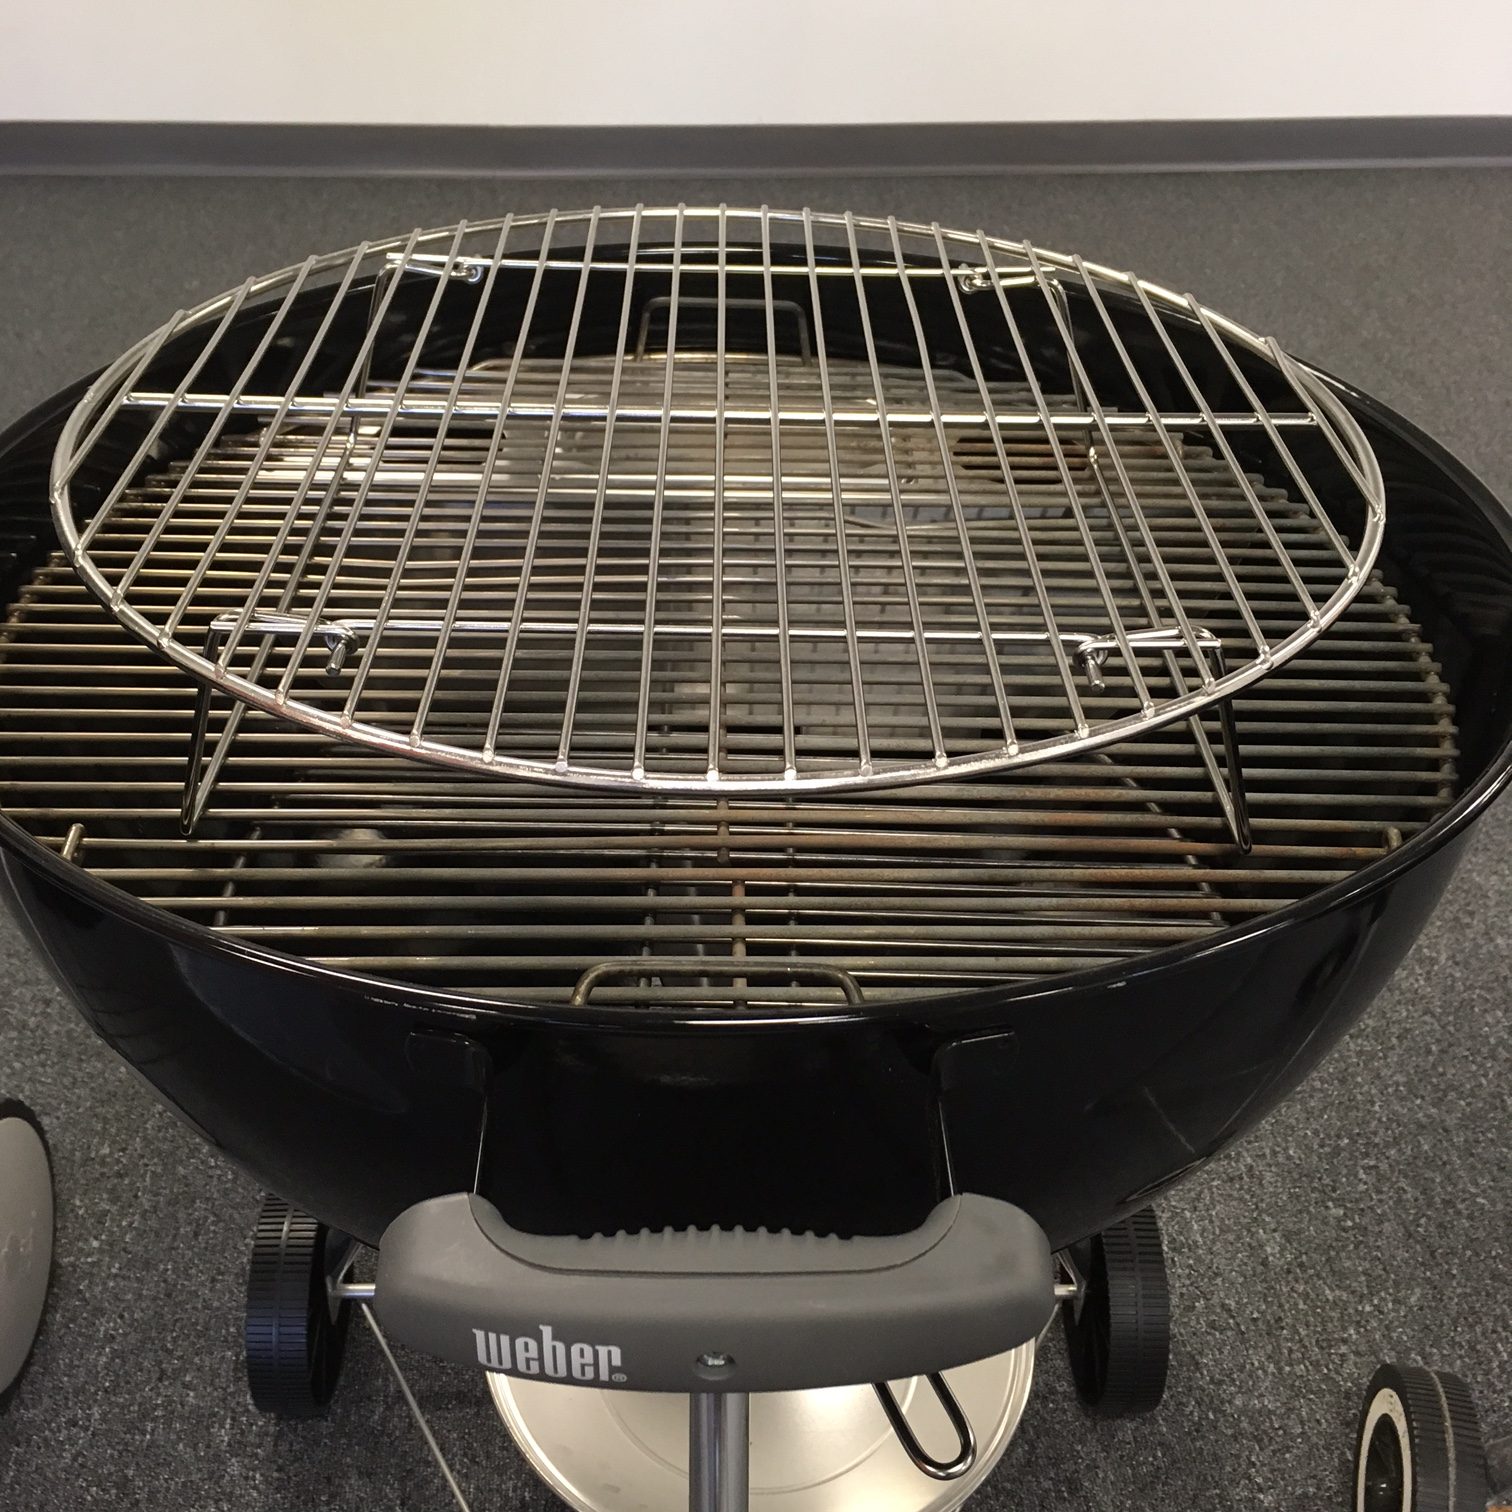 Accessory Bundle for 22 Kettle Charcoal Grills